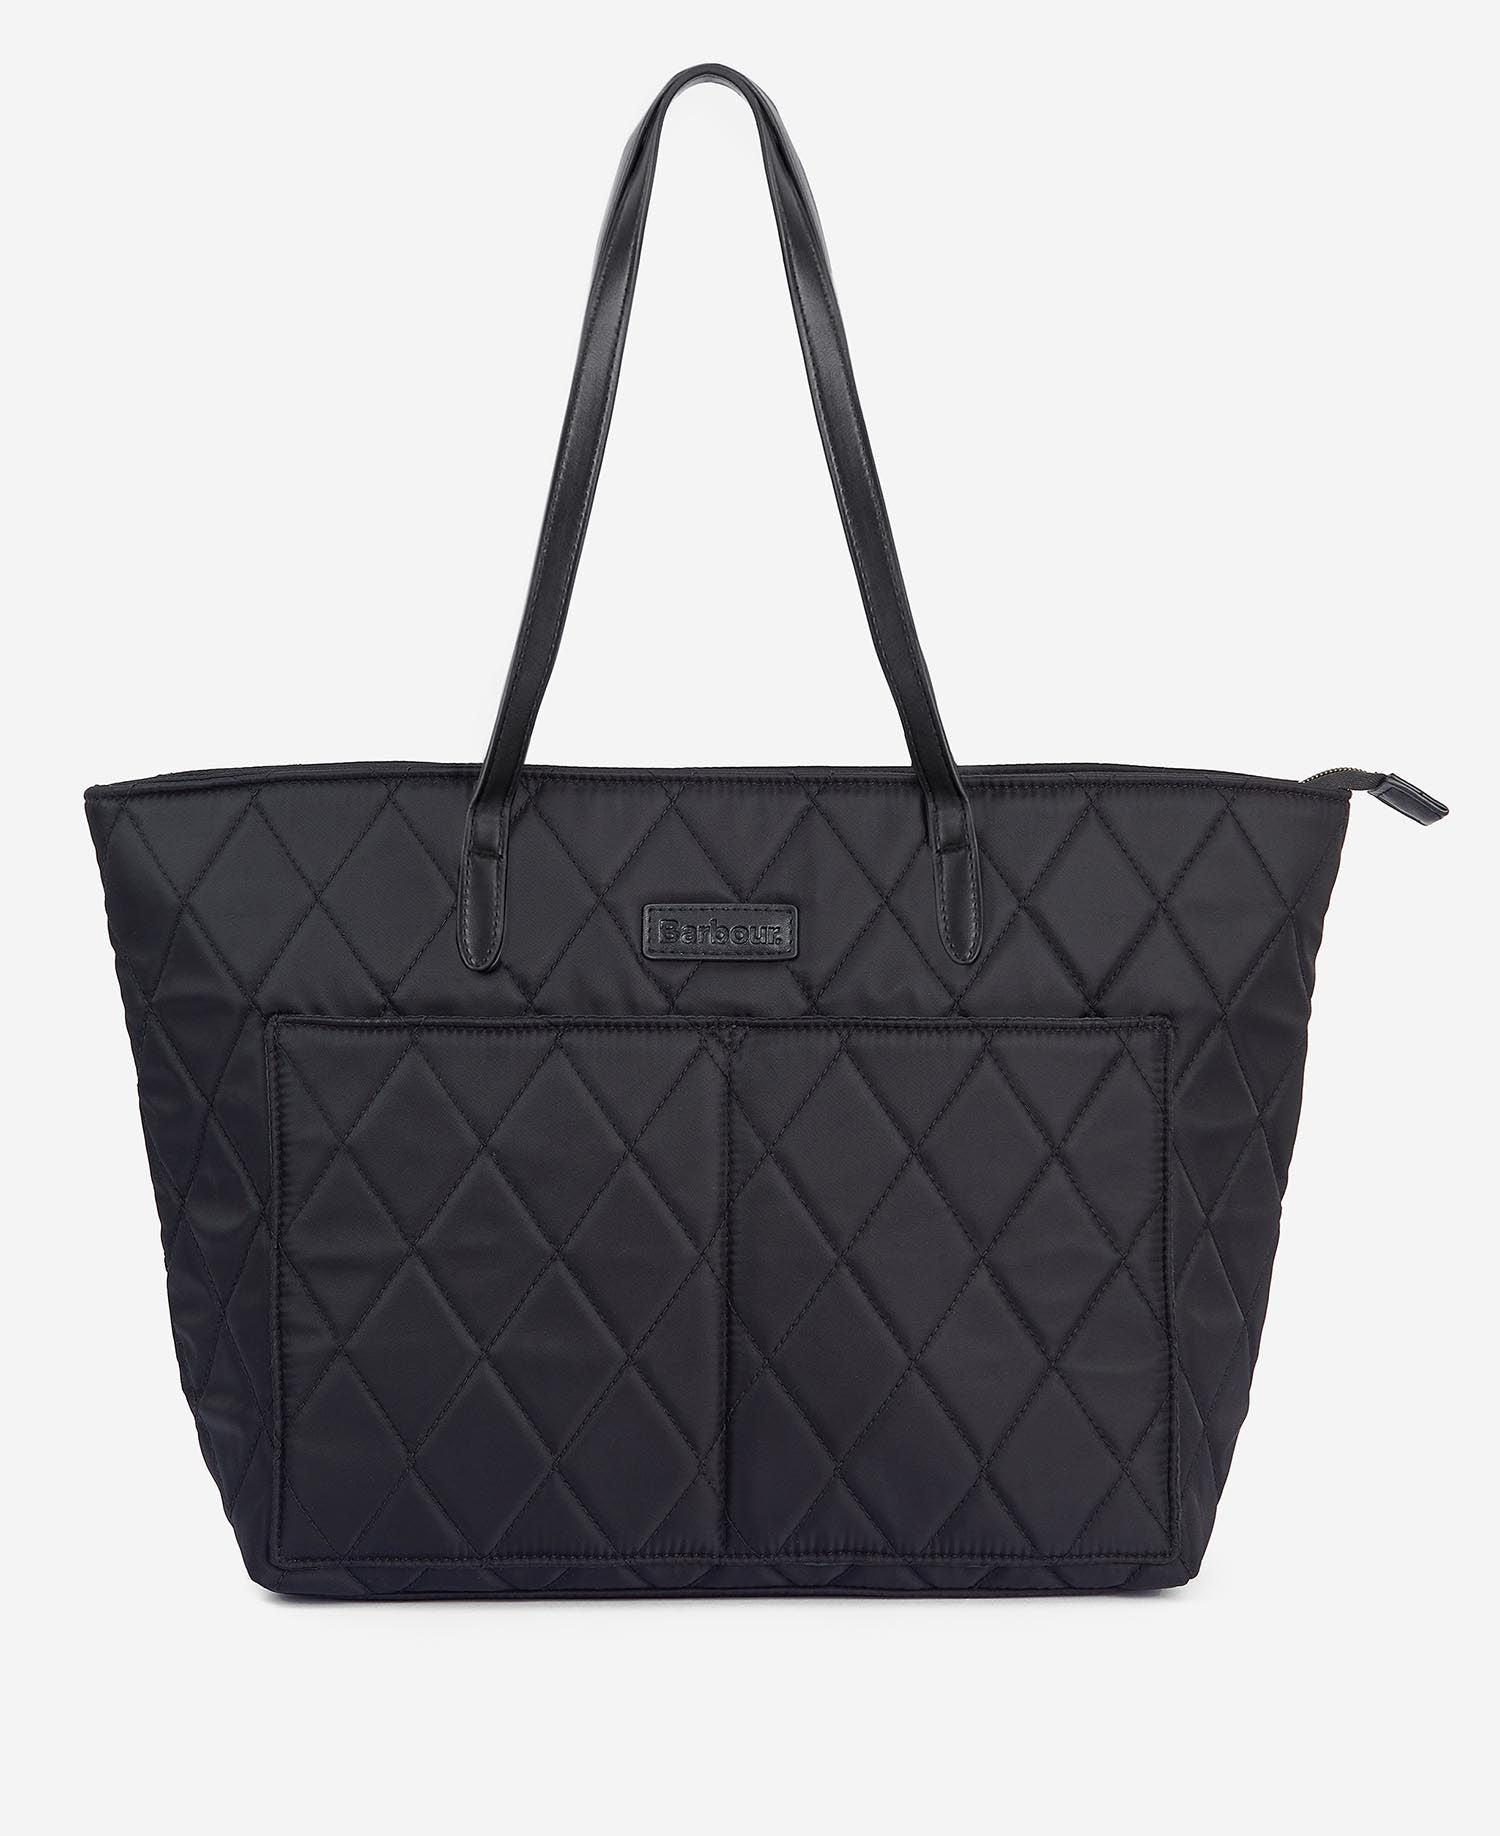 BARBOUR Women's Quilted Tote Bag LBA0395 Black